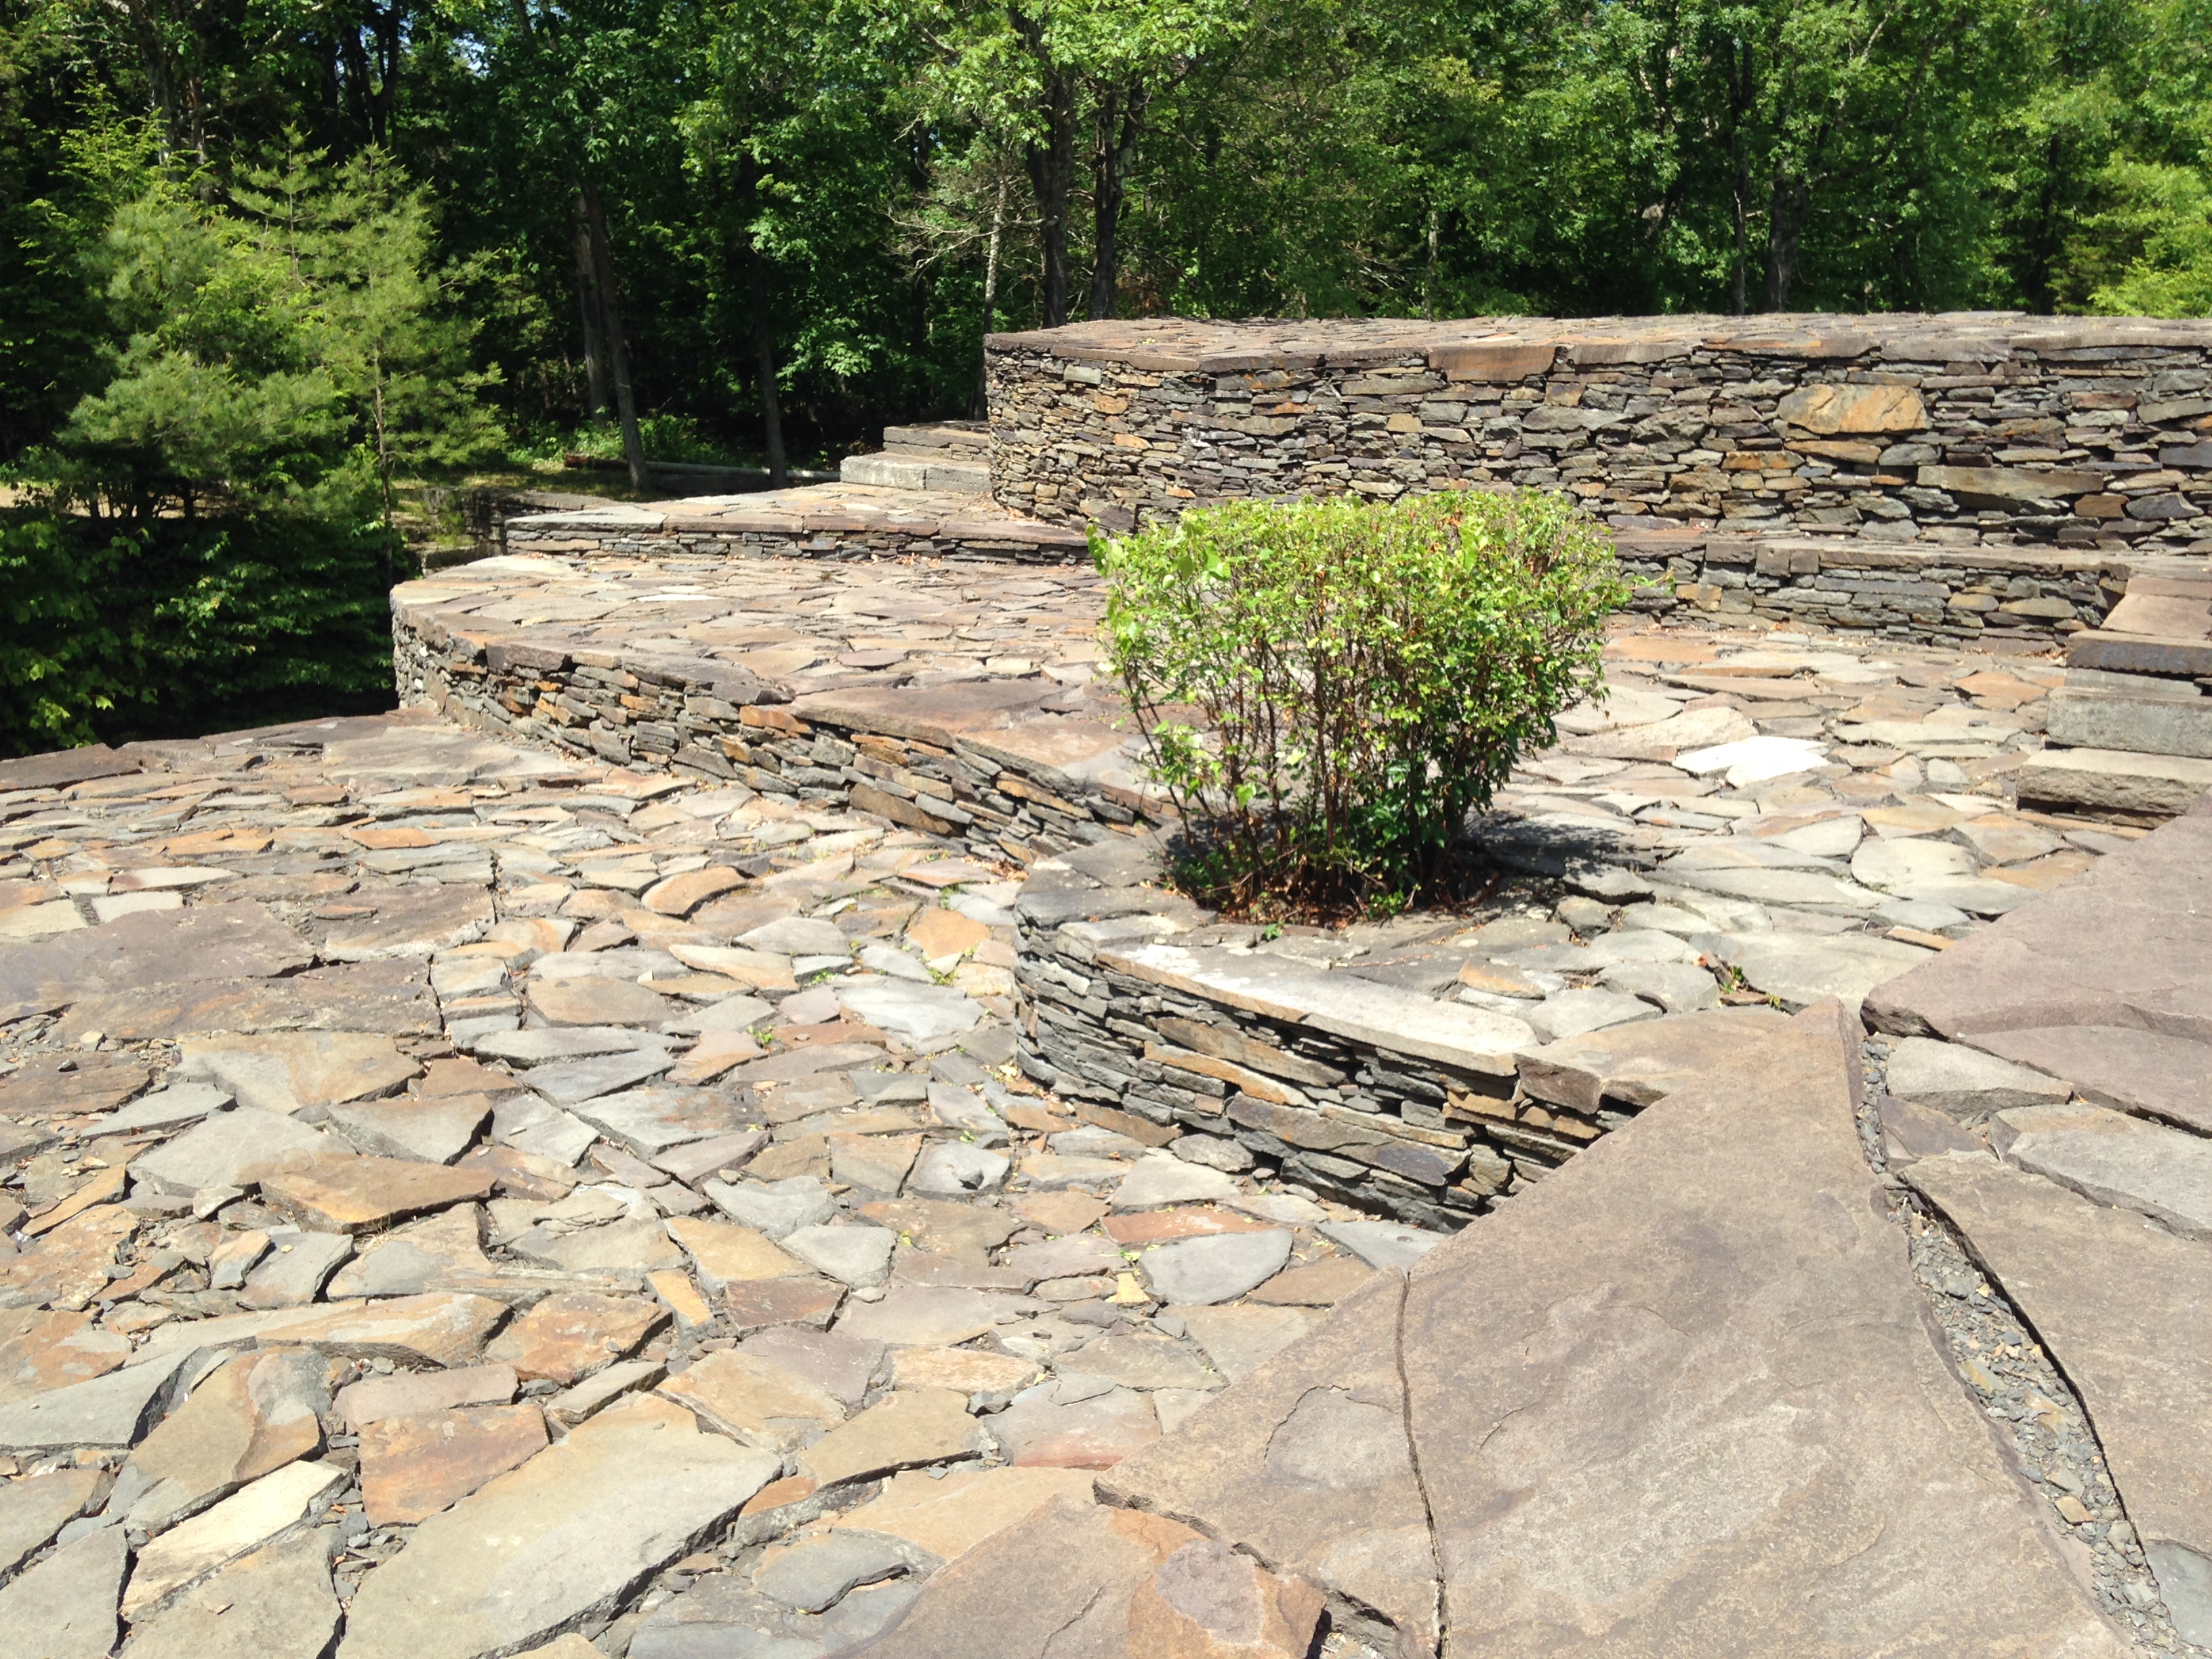 Opus 40 - Hudson Valley Day Trips